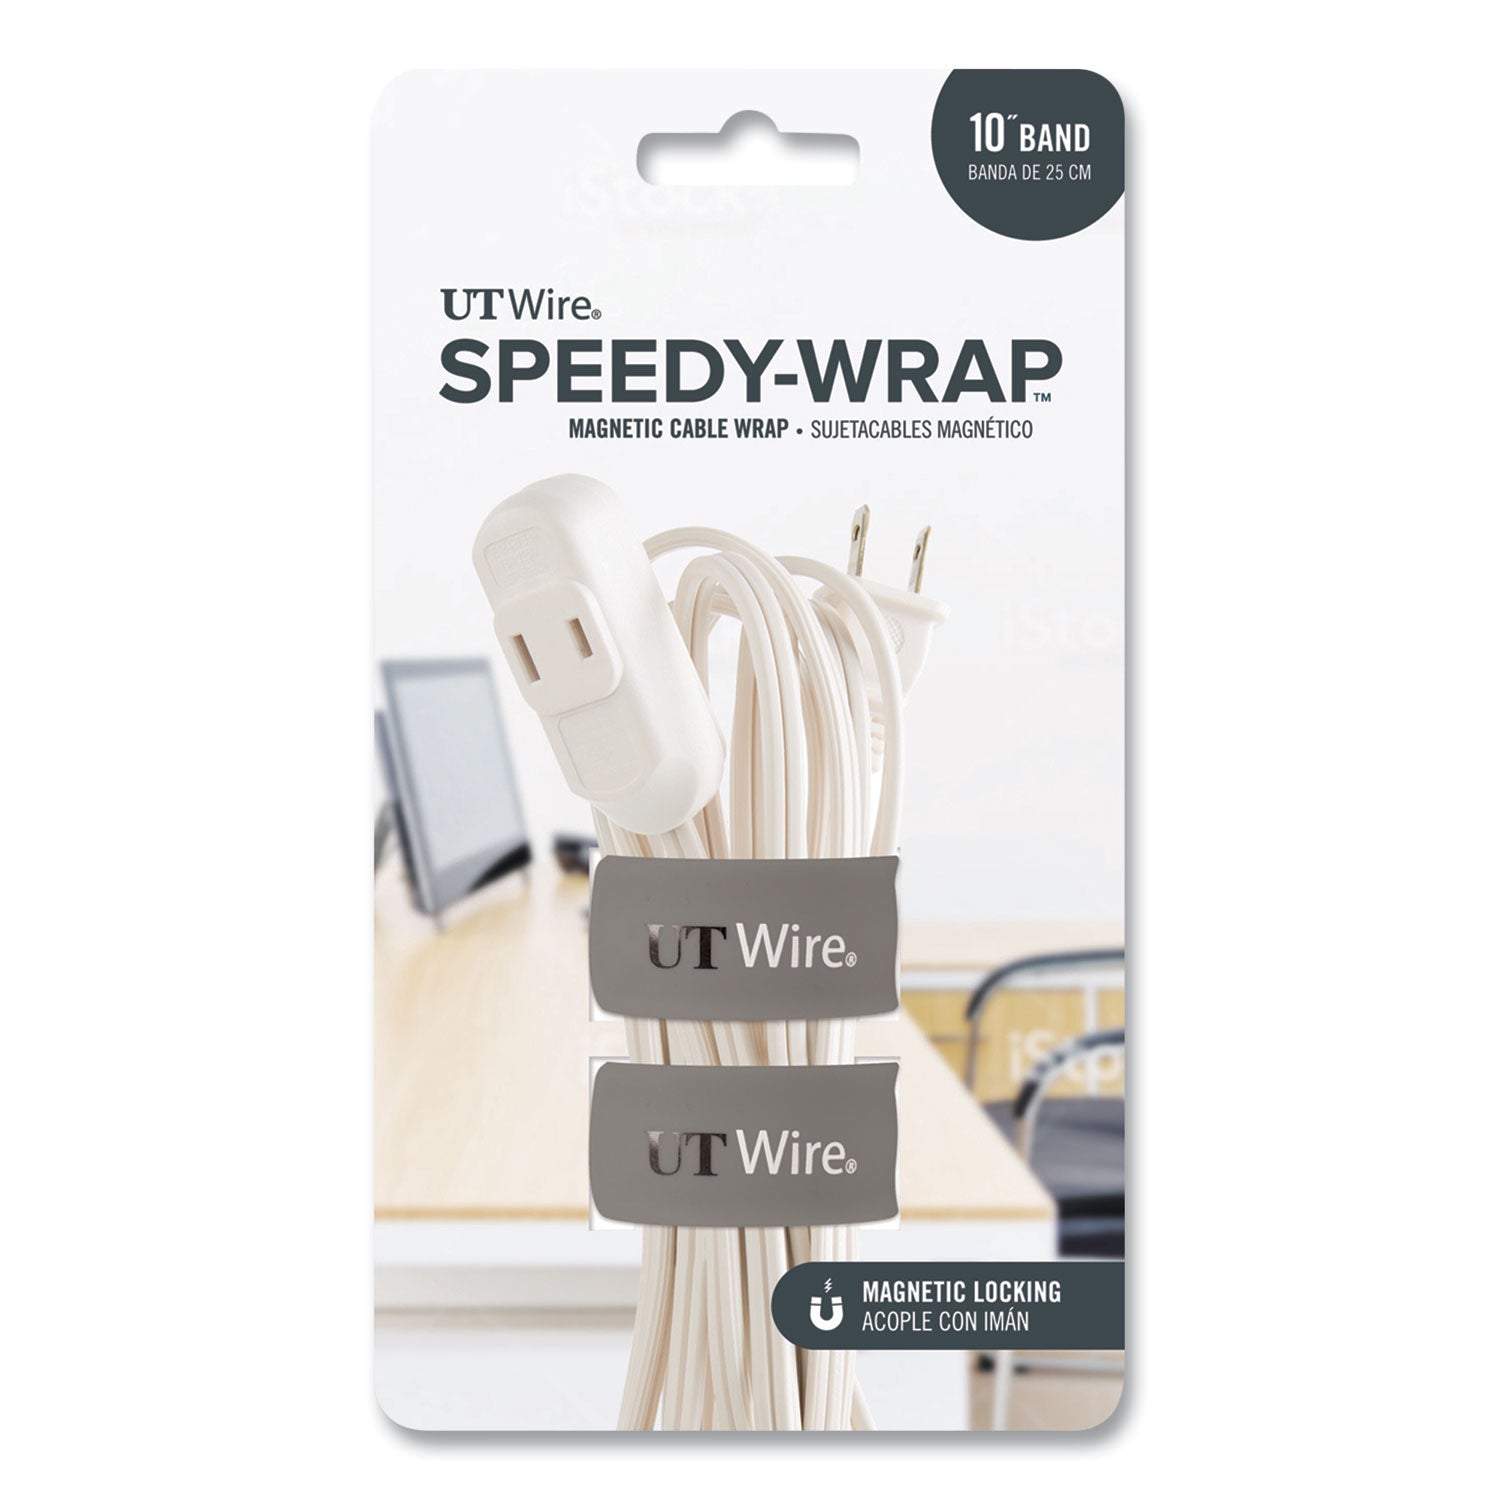 speedy-wrap-magnetic-cable-wrap-082-x-10-gray-2-pack_rboutwswm2gy - 1